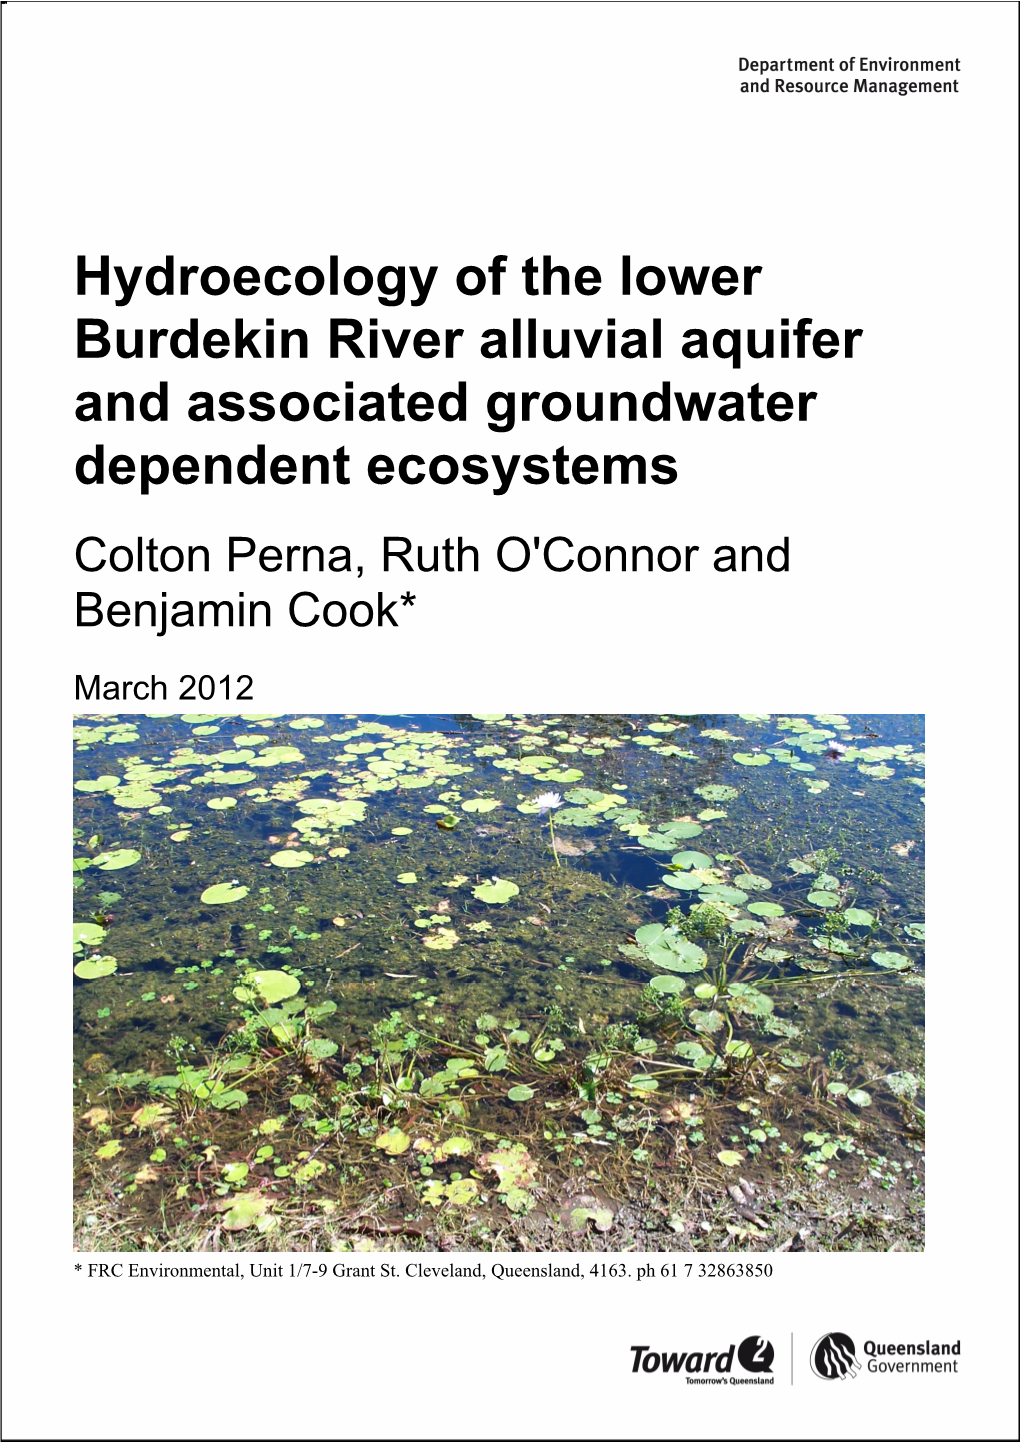 Hydroecology of the Lower Burdekin River Alluvial Aquifer and Associated Groundwater Dependent Ecosystems Colton Perna, Ruth O'connor and Benjamin Cook*